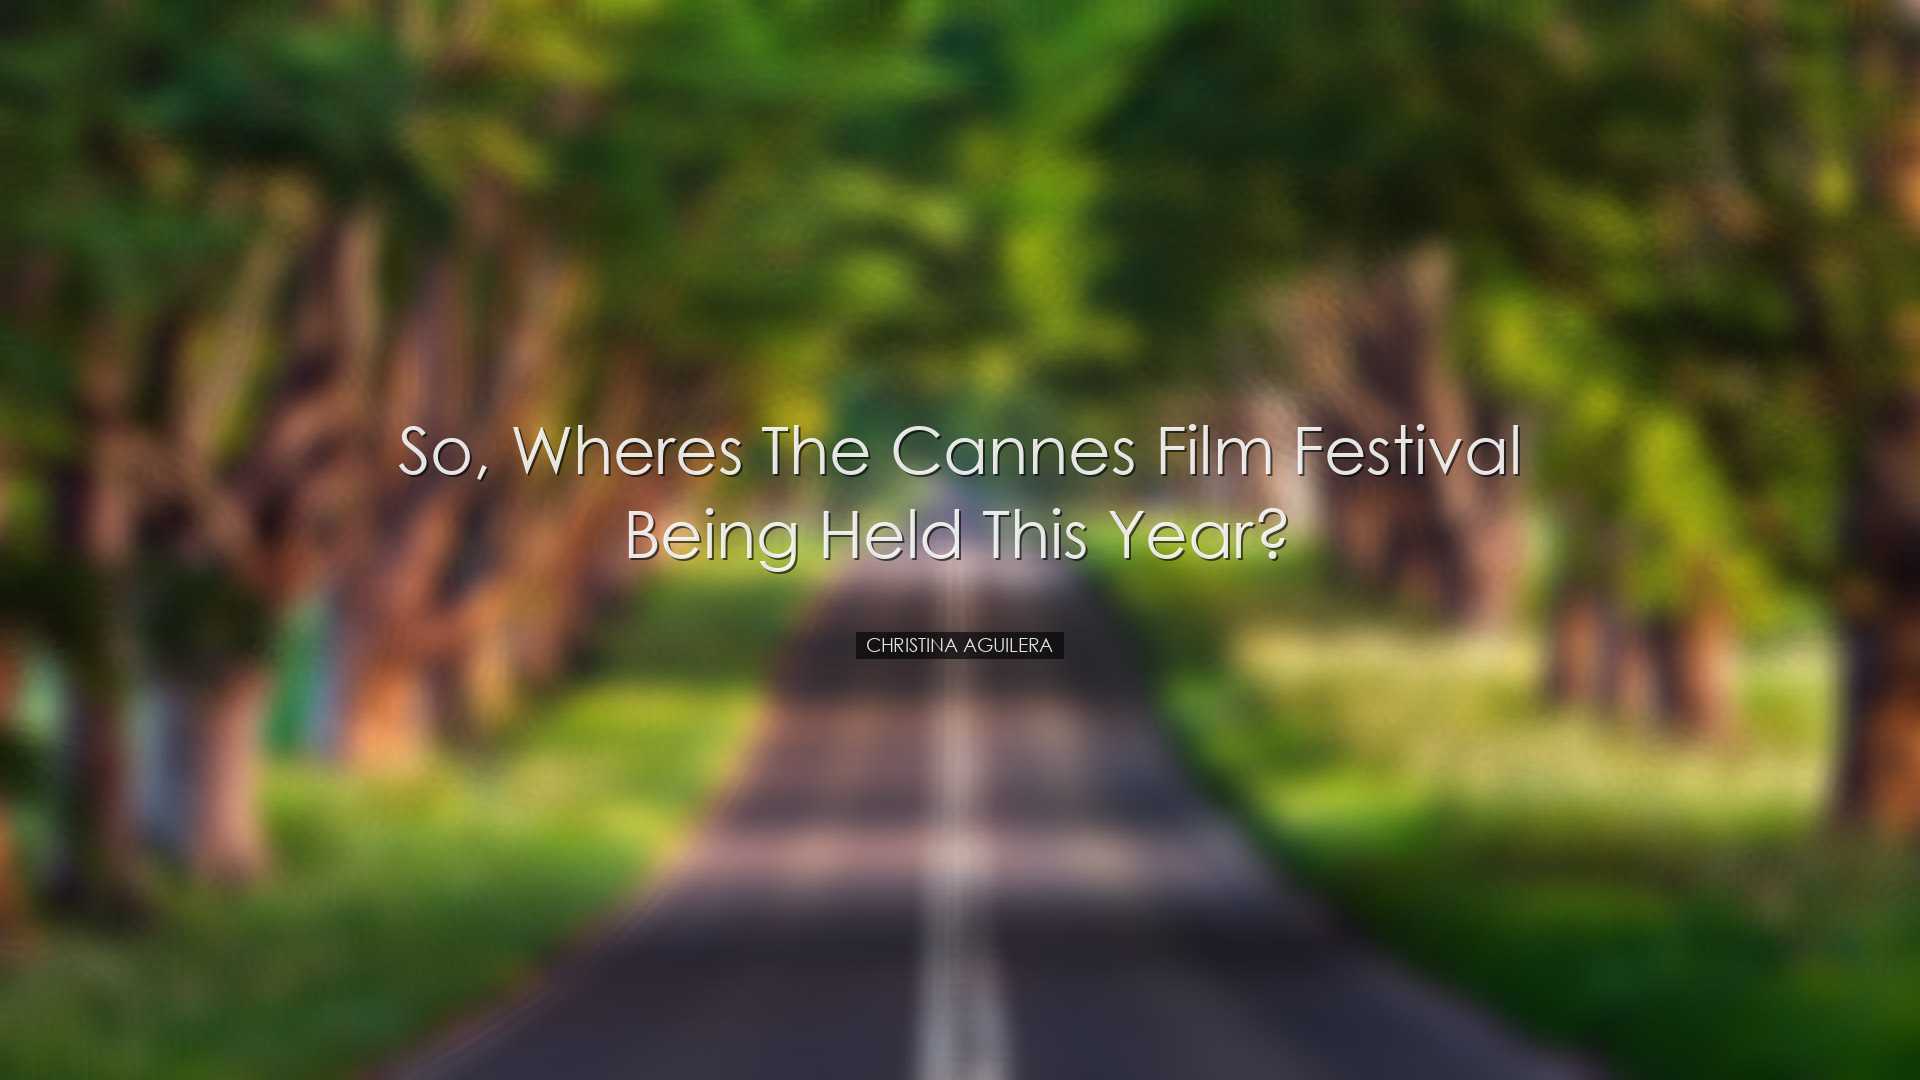 So, wheres the Cannes Film Festival being held this year? - Christ